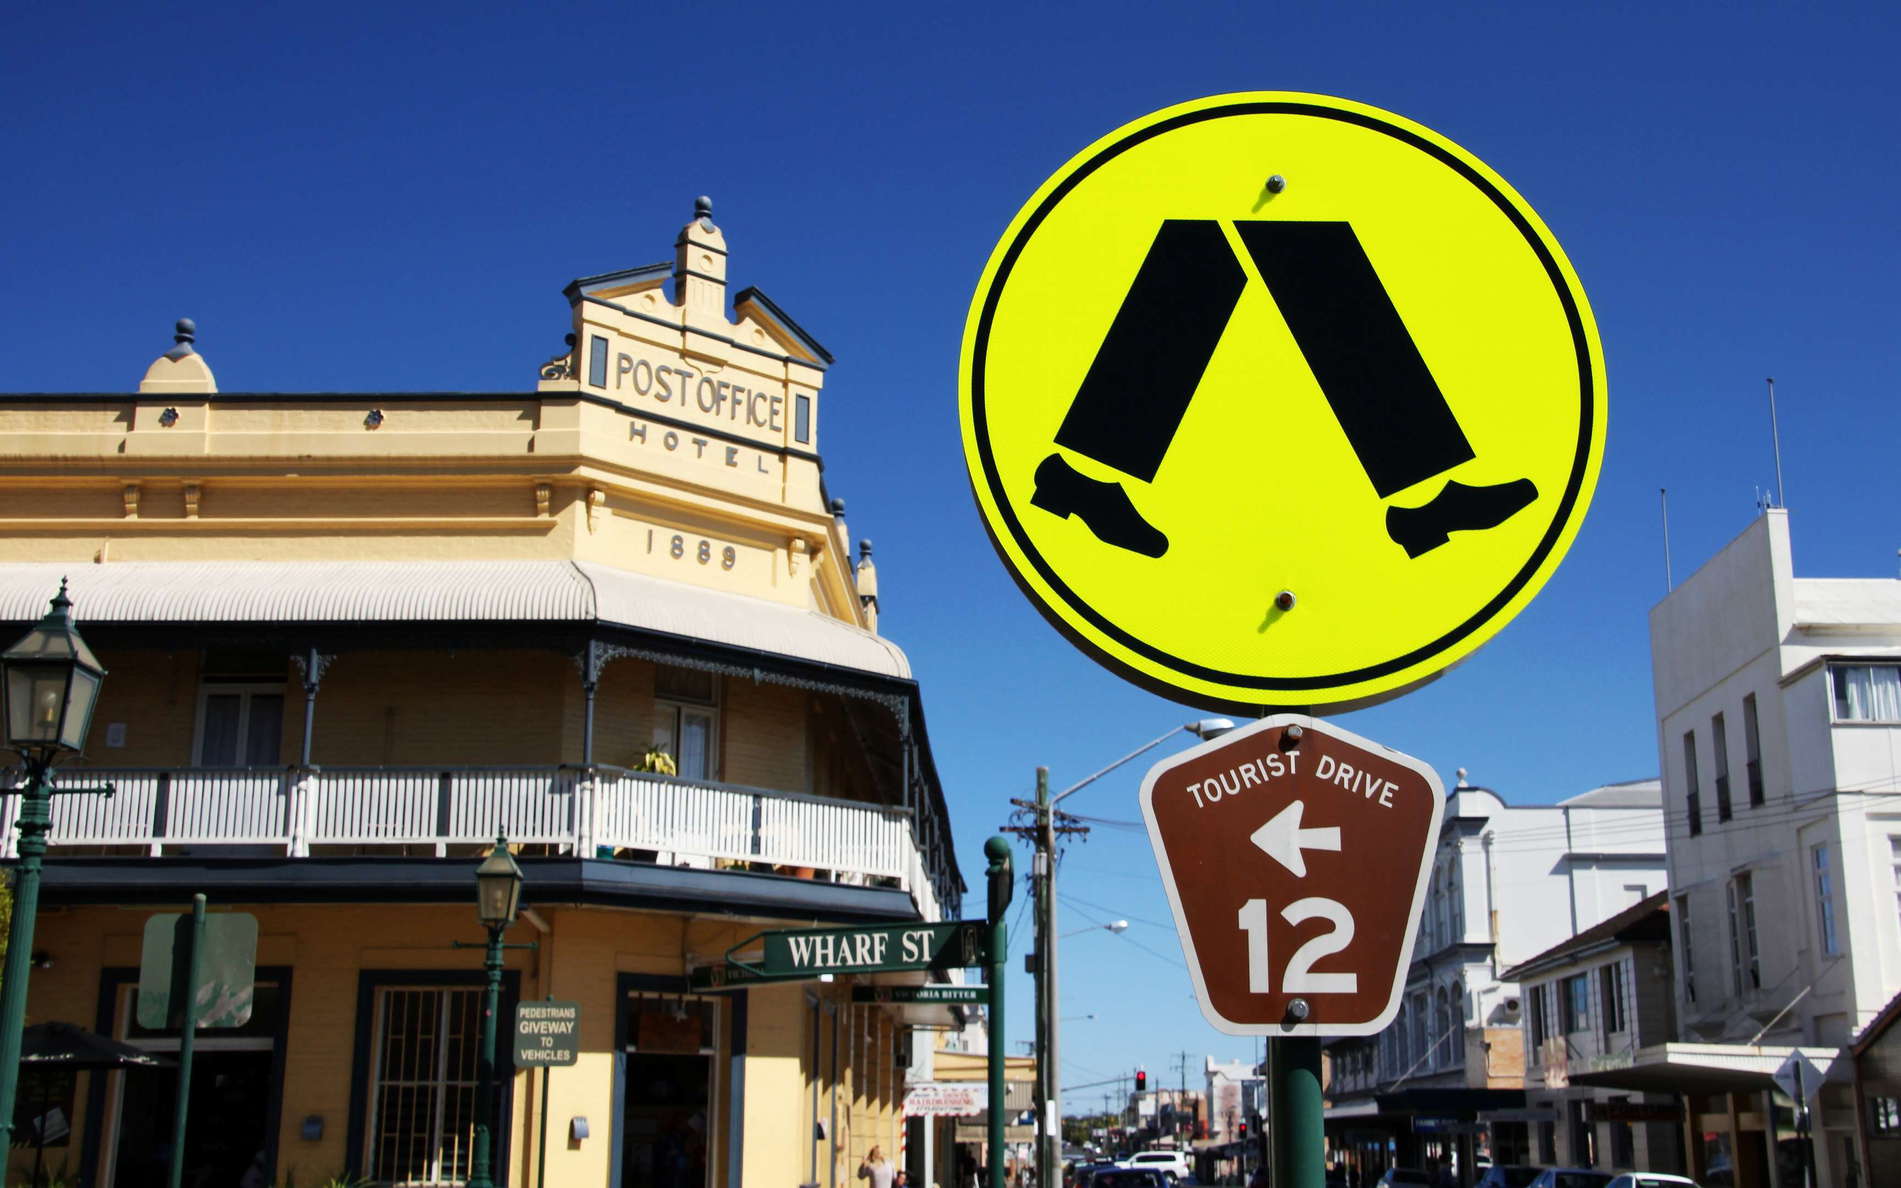 Maryborough  |  Post Office Hotel and signboards